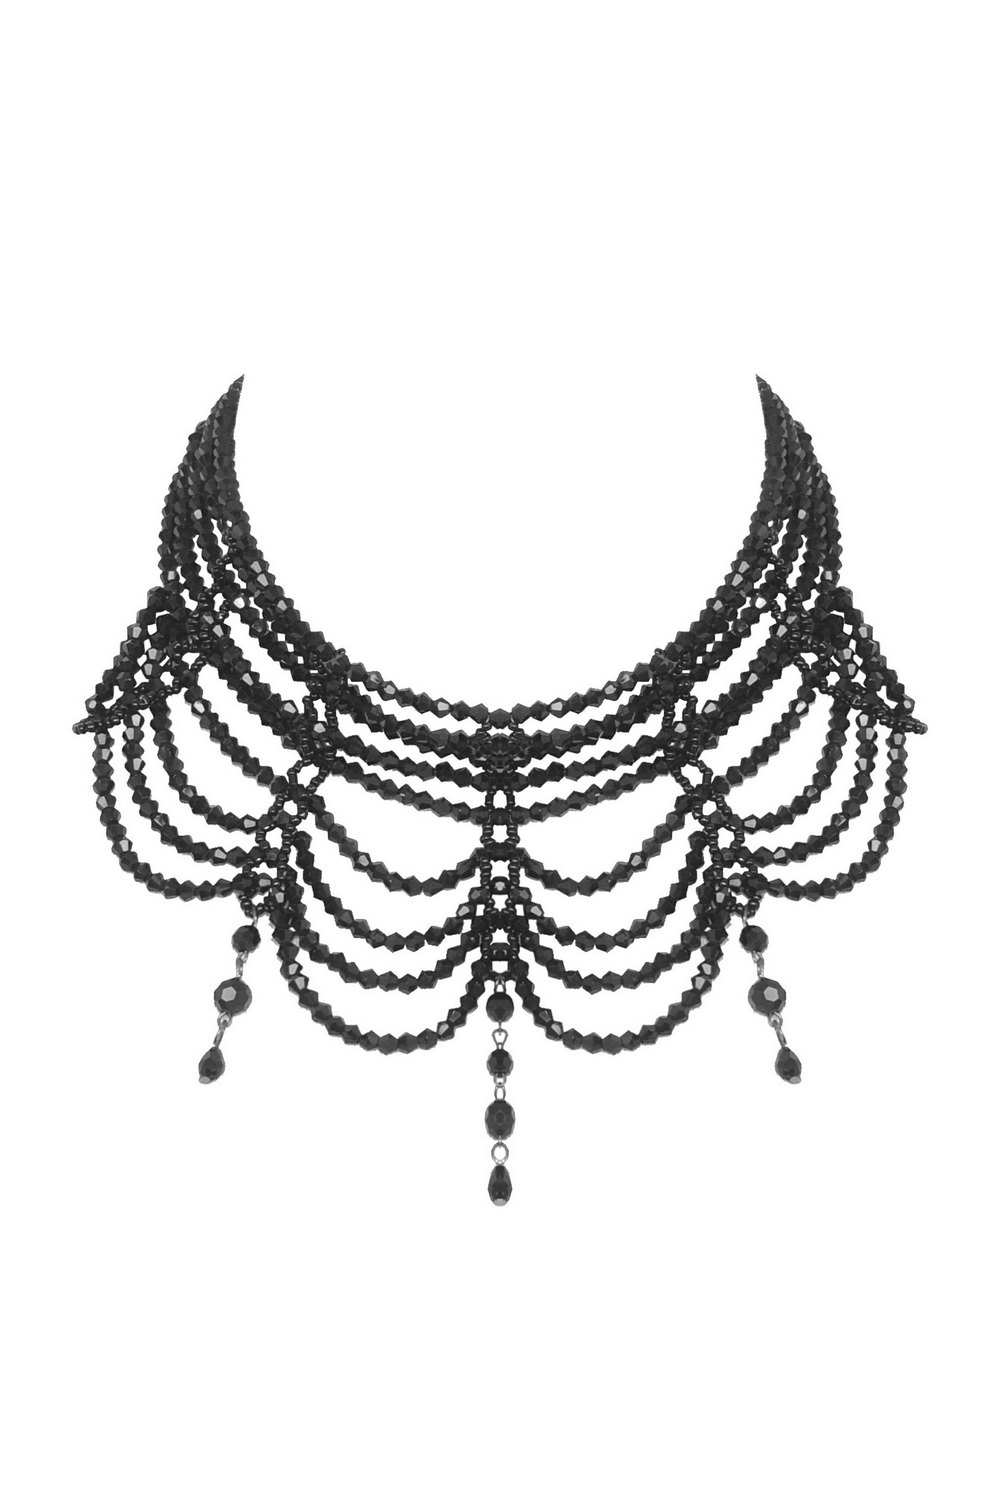 Elegant Glass Beaded Necklace for Evening Glam